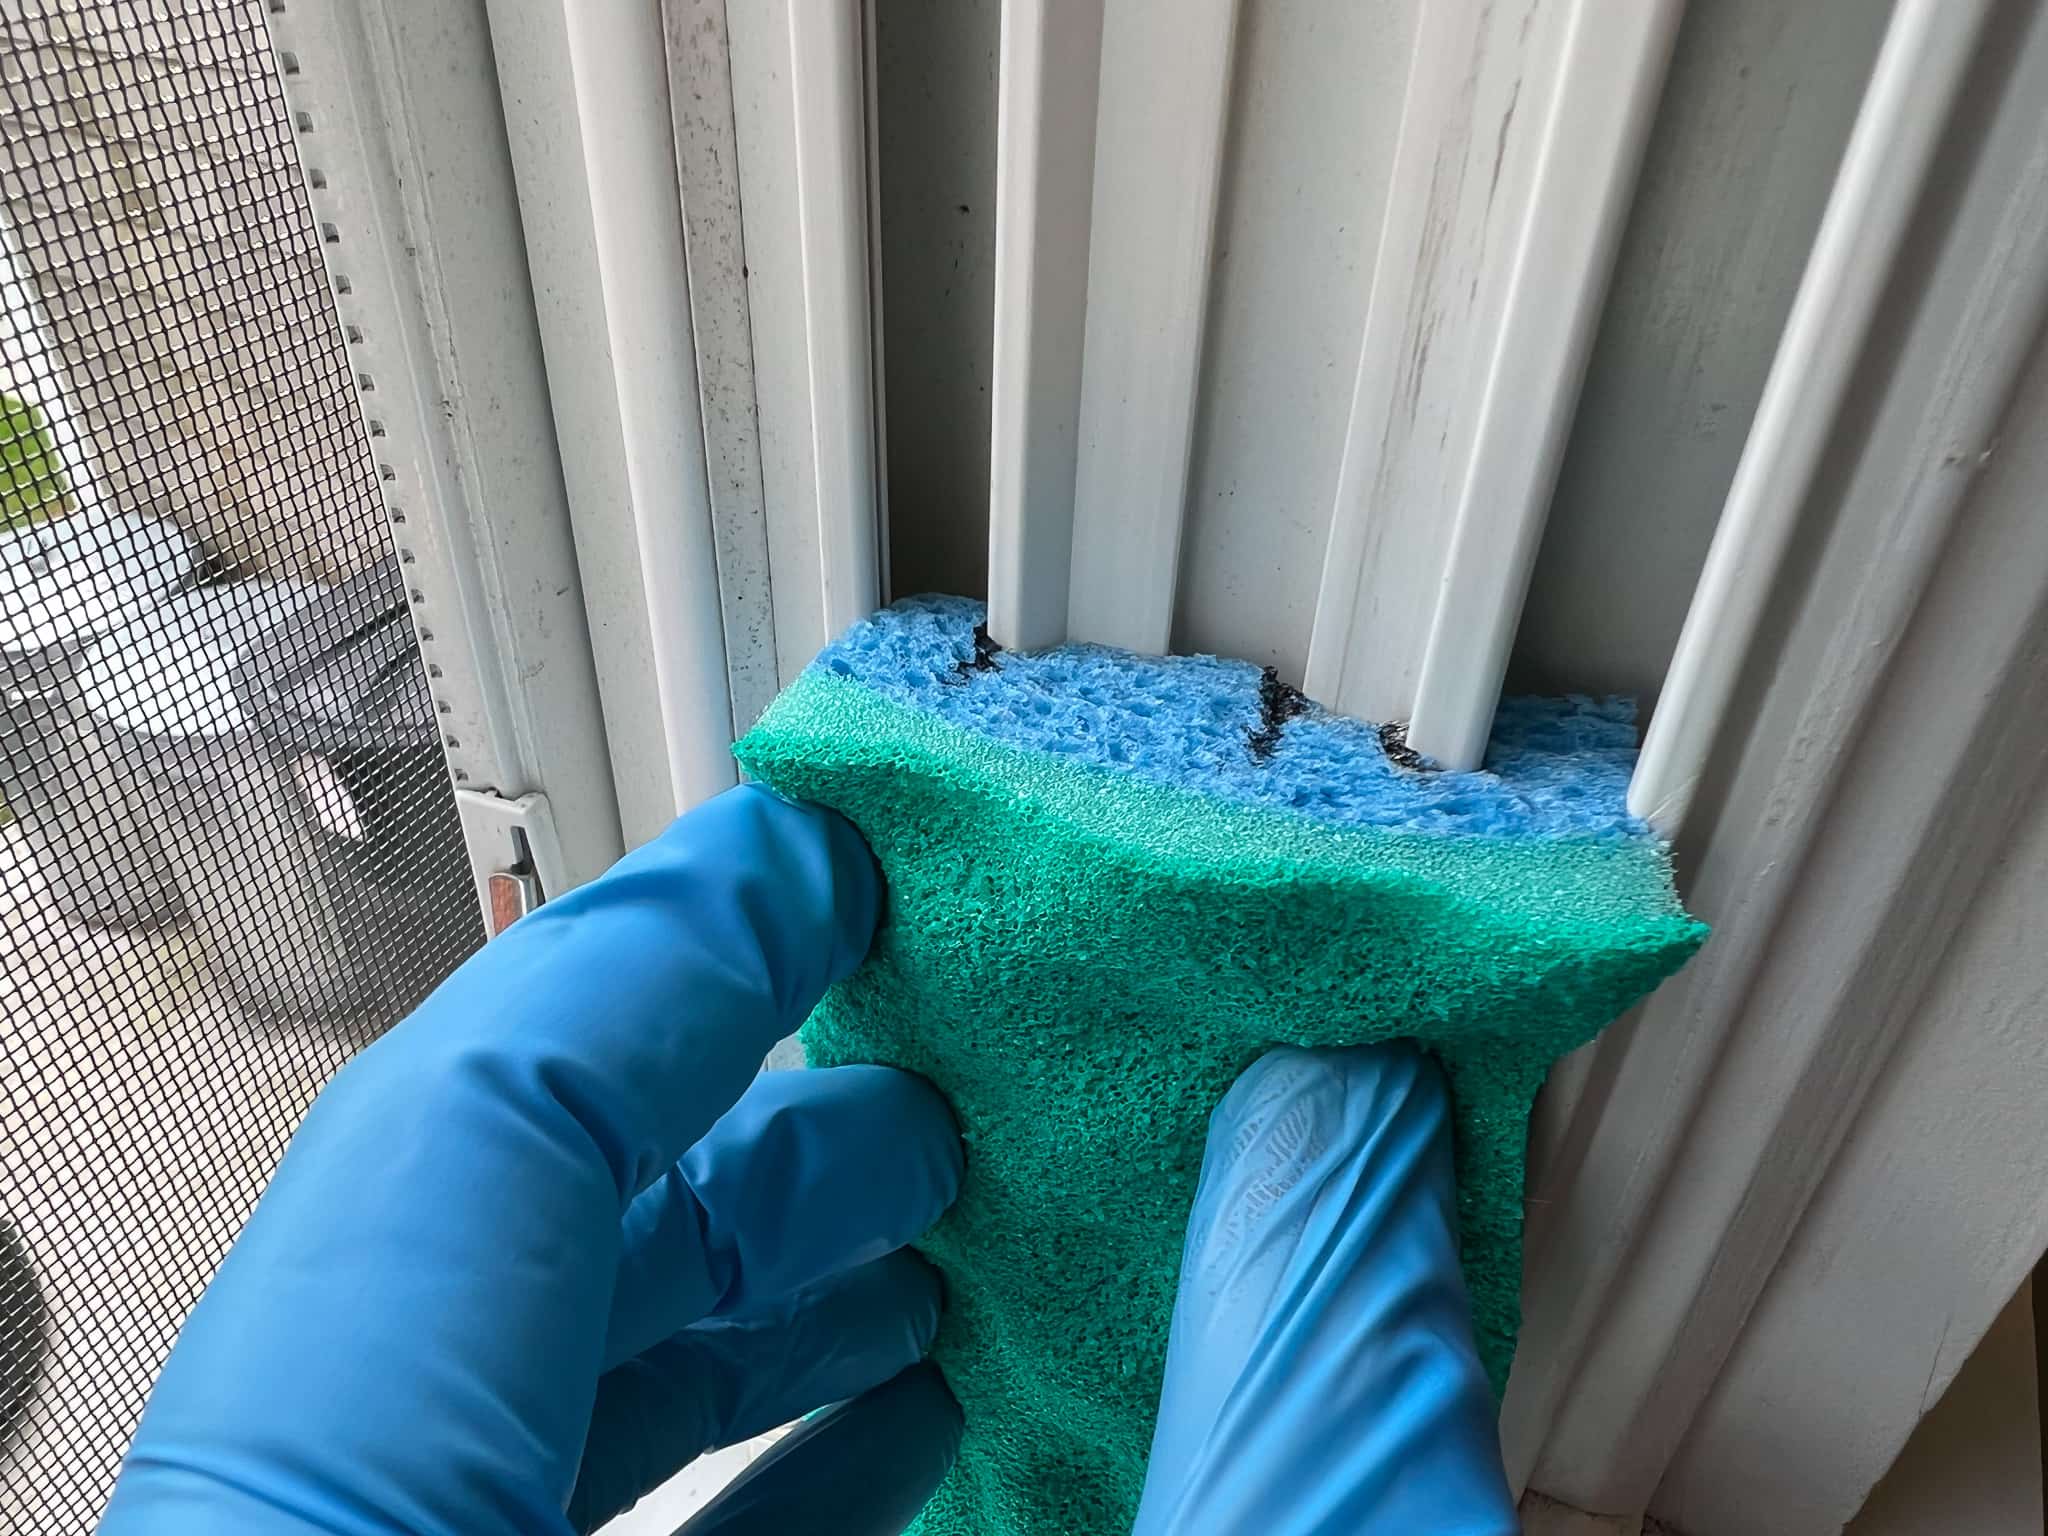 window track cleaning tool